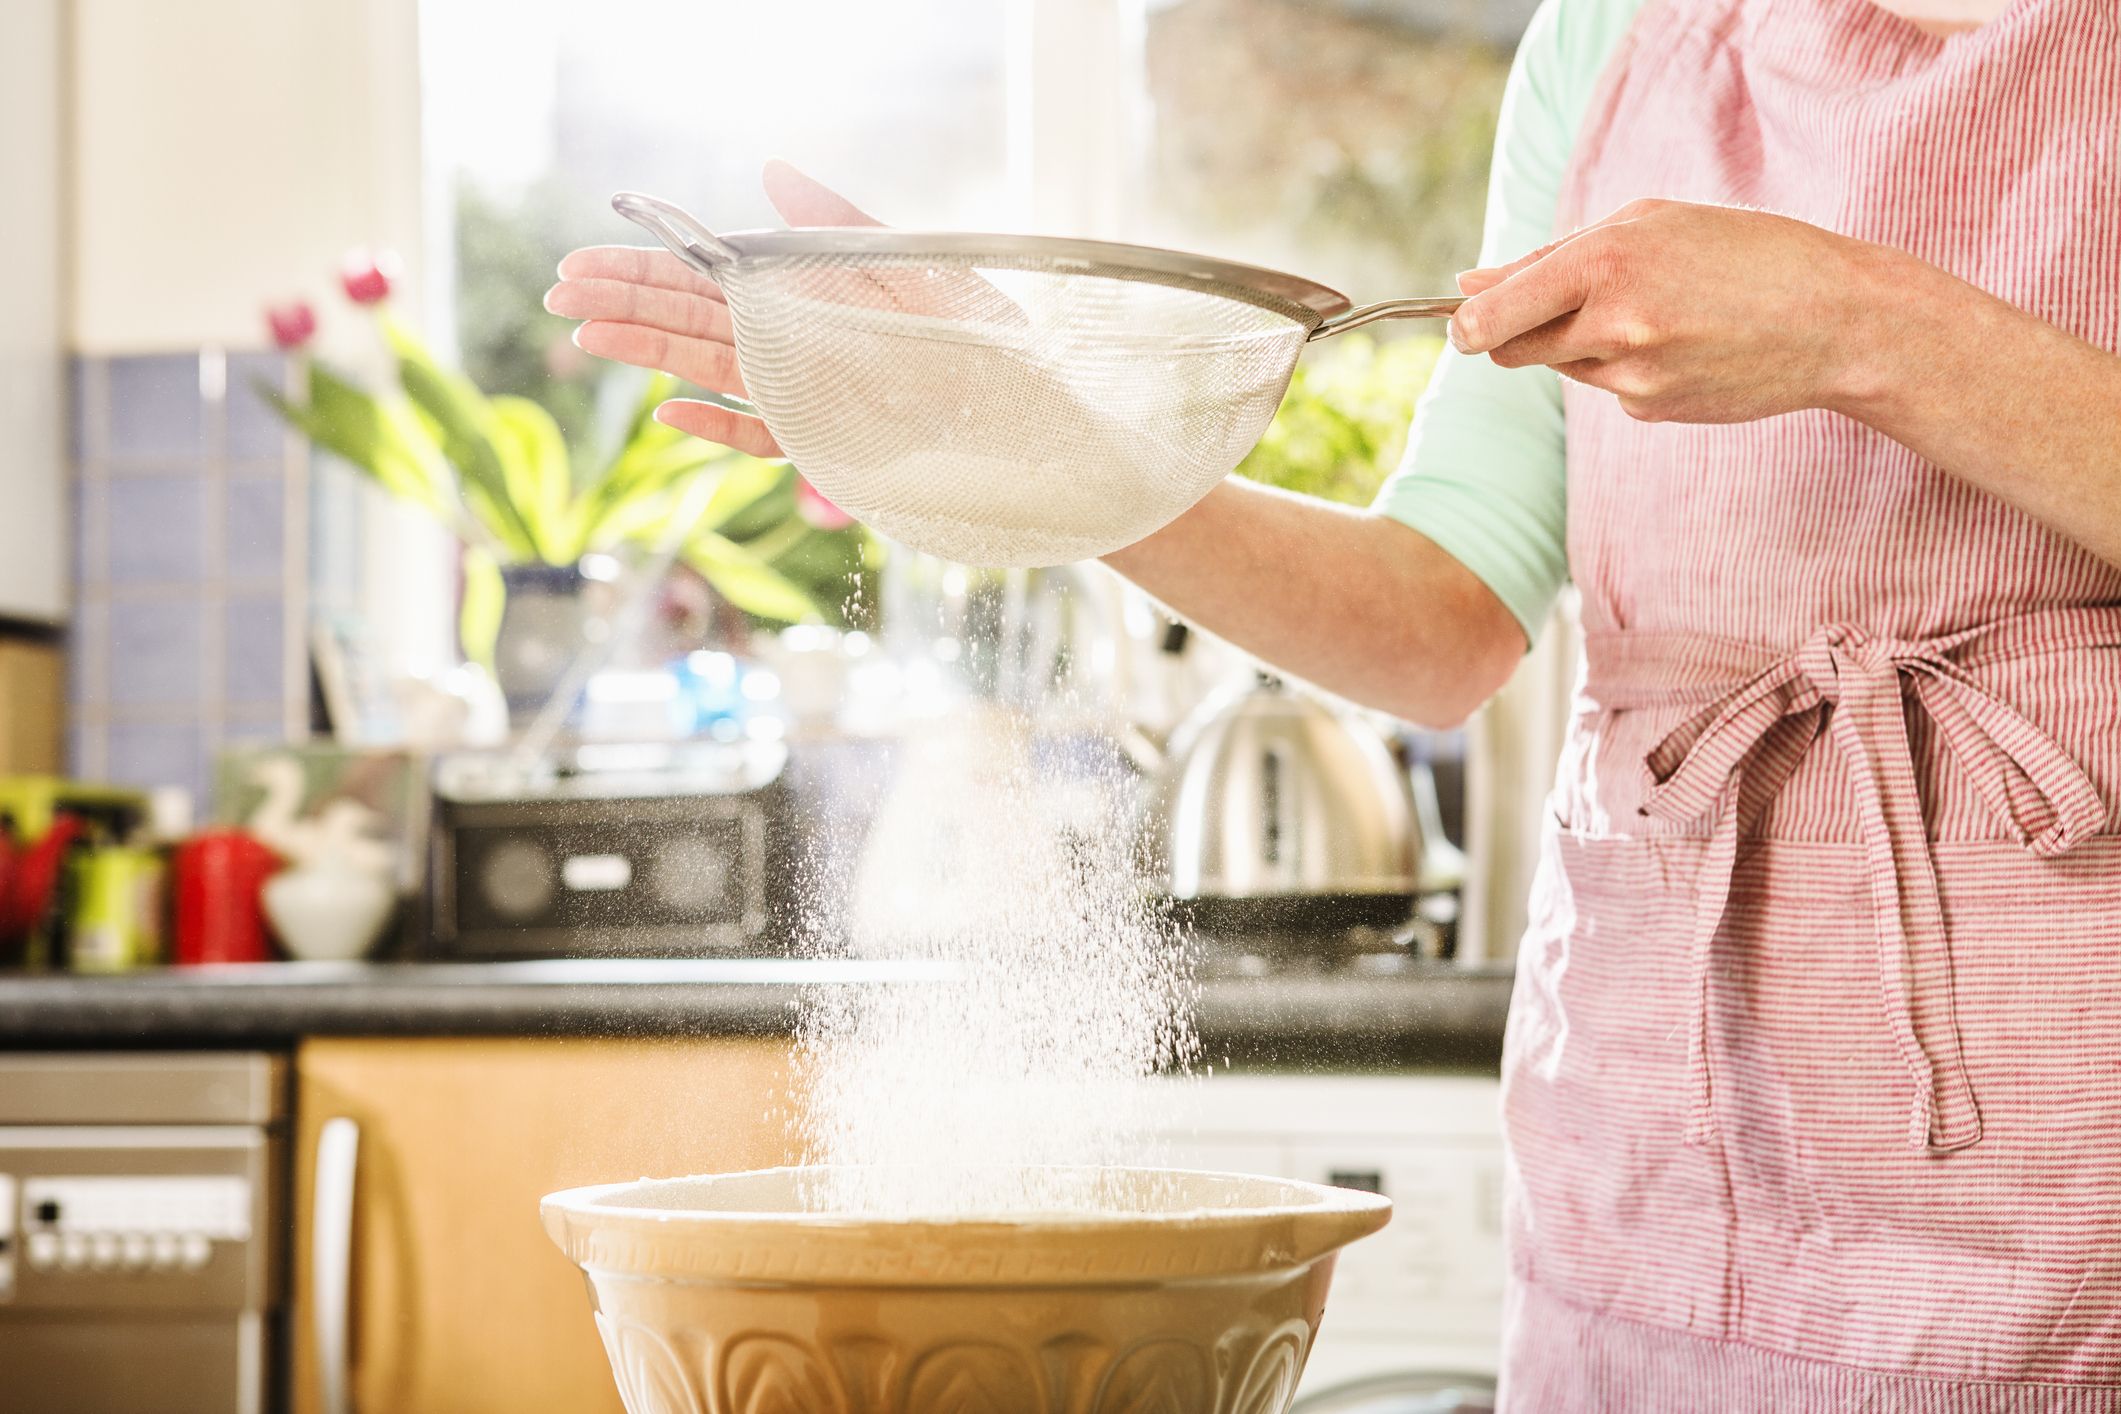 Aldi Launches 10kg Of Flour For All Your Baking And Pizza Making Needs